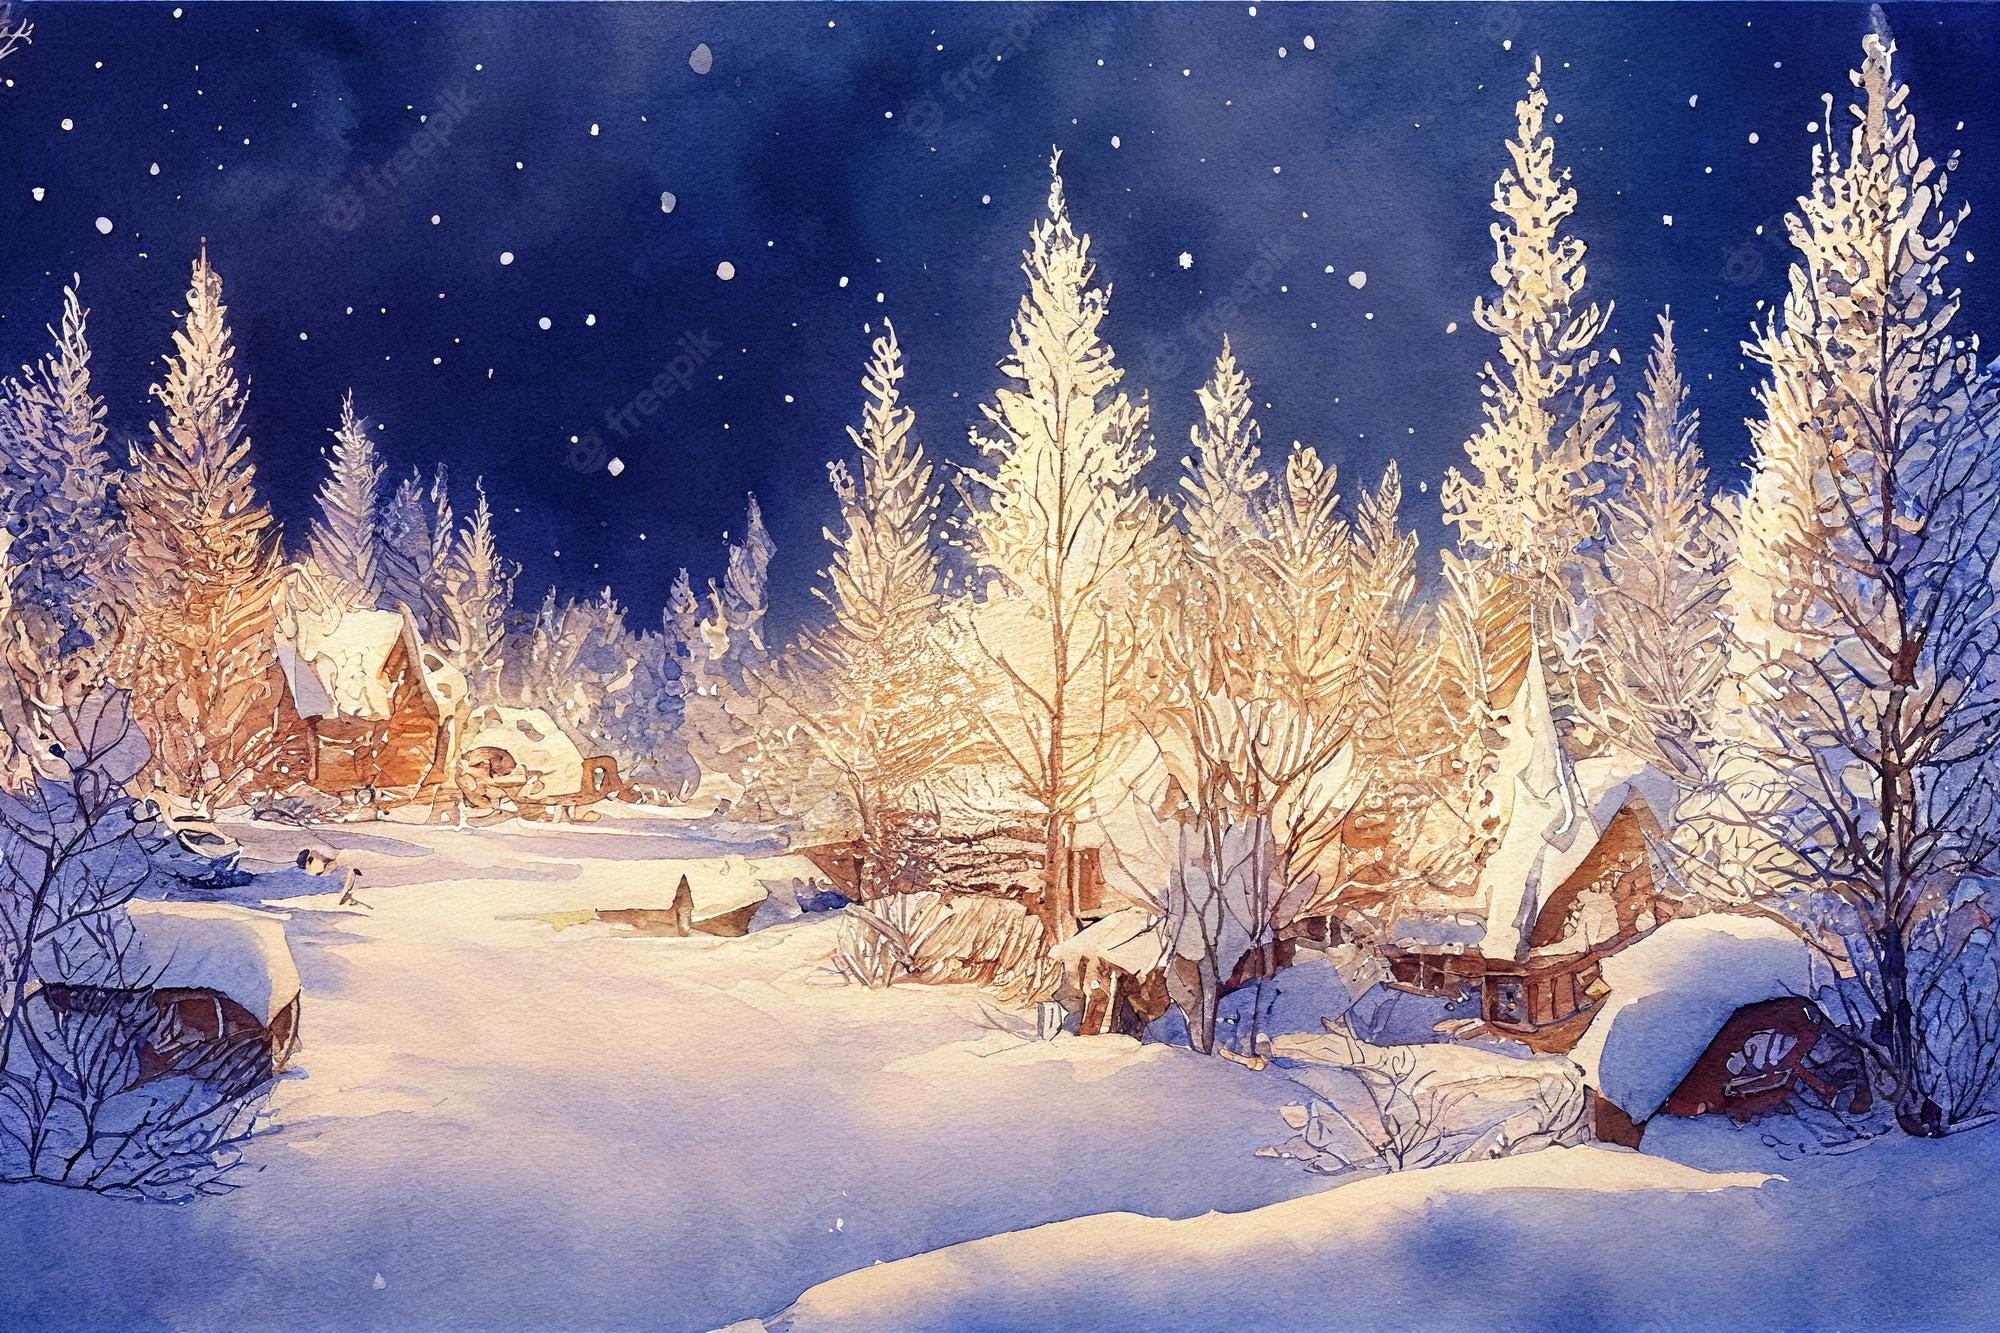 Snow falling background Image. Free Vectors, & PSD